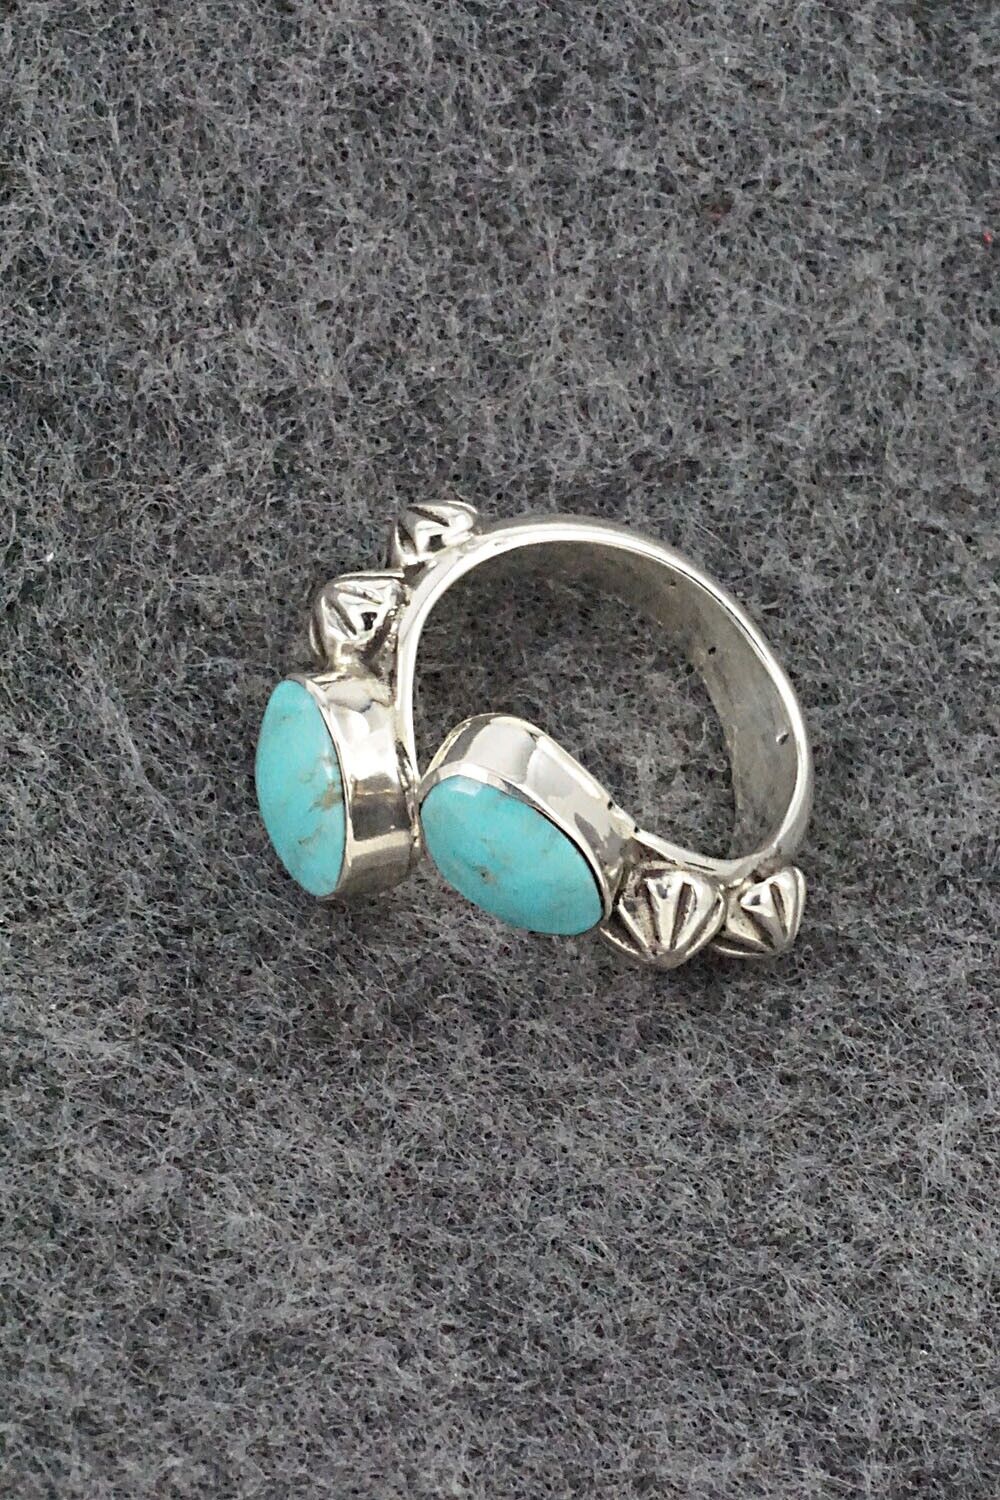 Turquoise & Sterling Silver Ring - Freda Martinez - Size 4.75